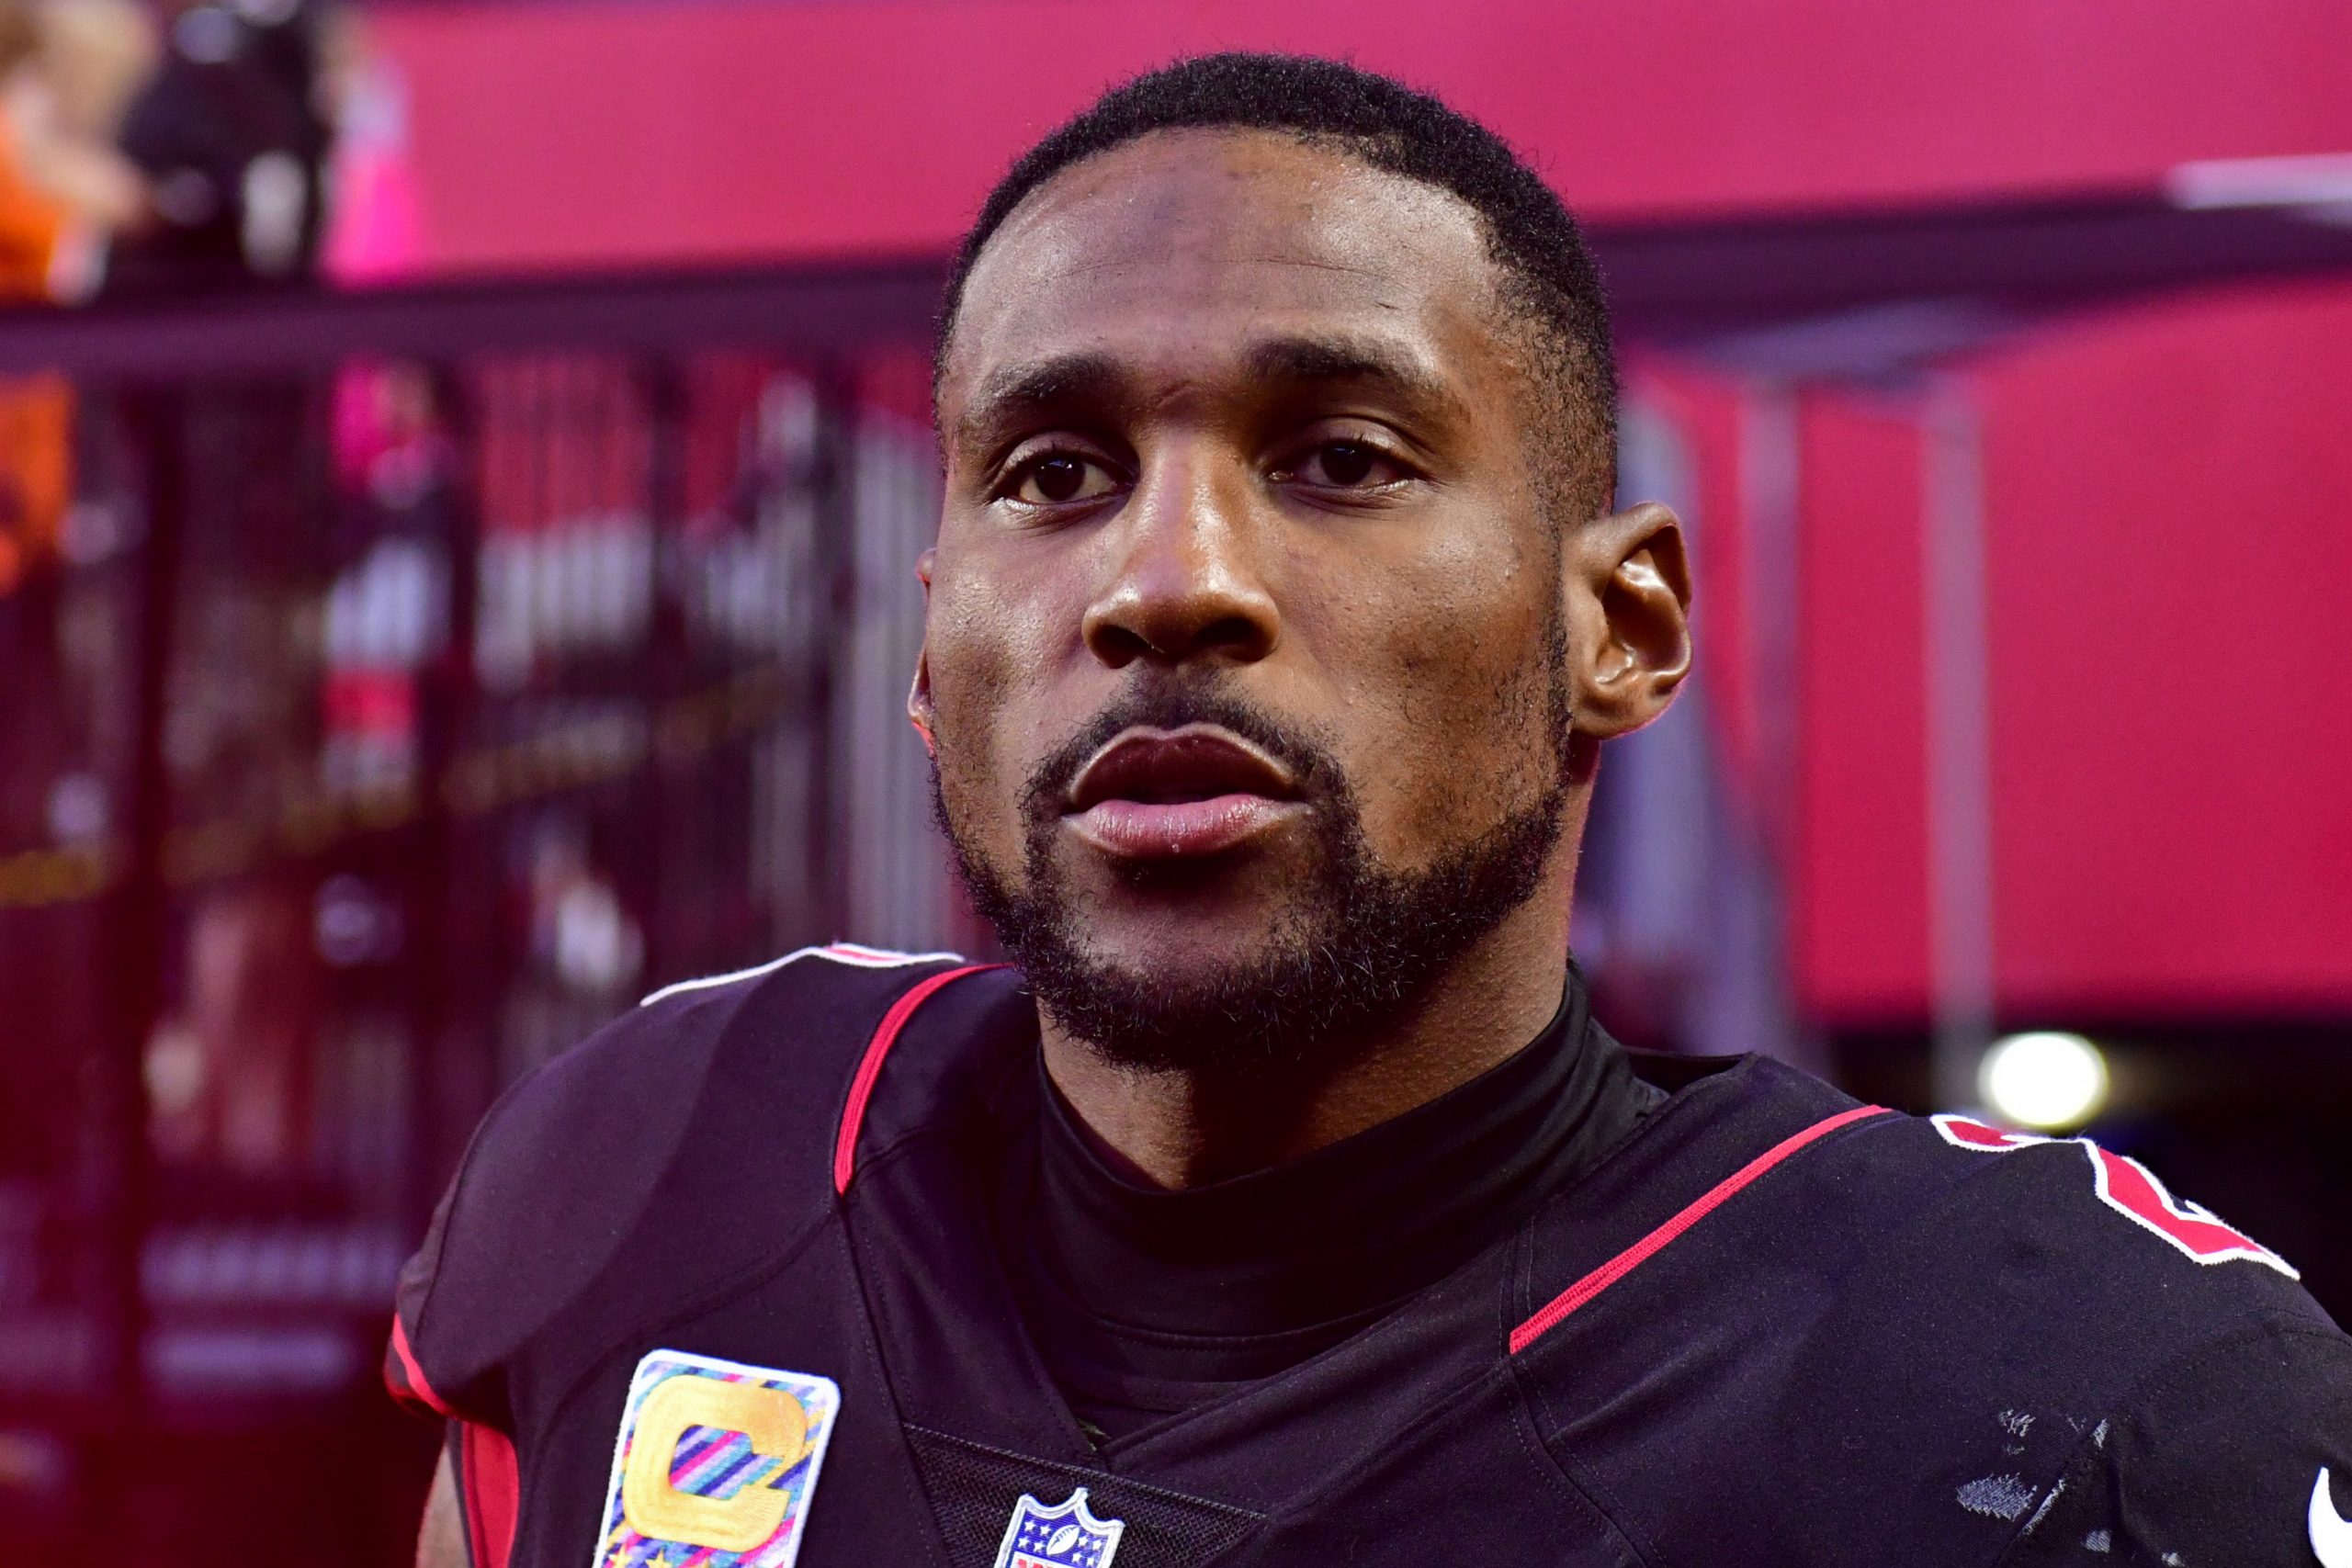 Chiefs trade rumors indicate Patrick Peterson could be acquired before